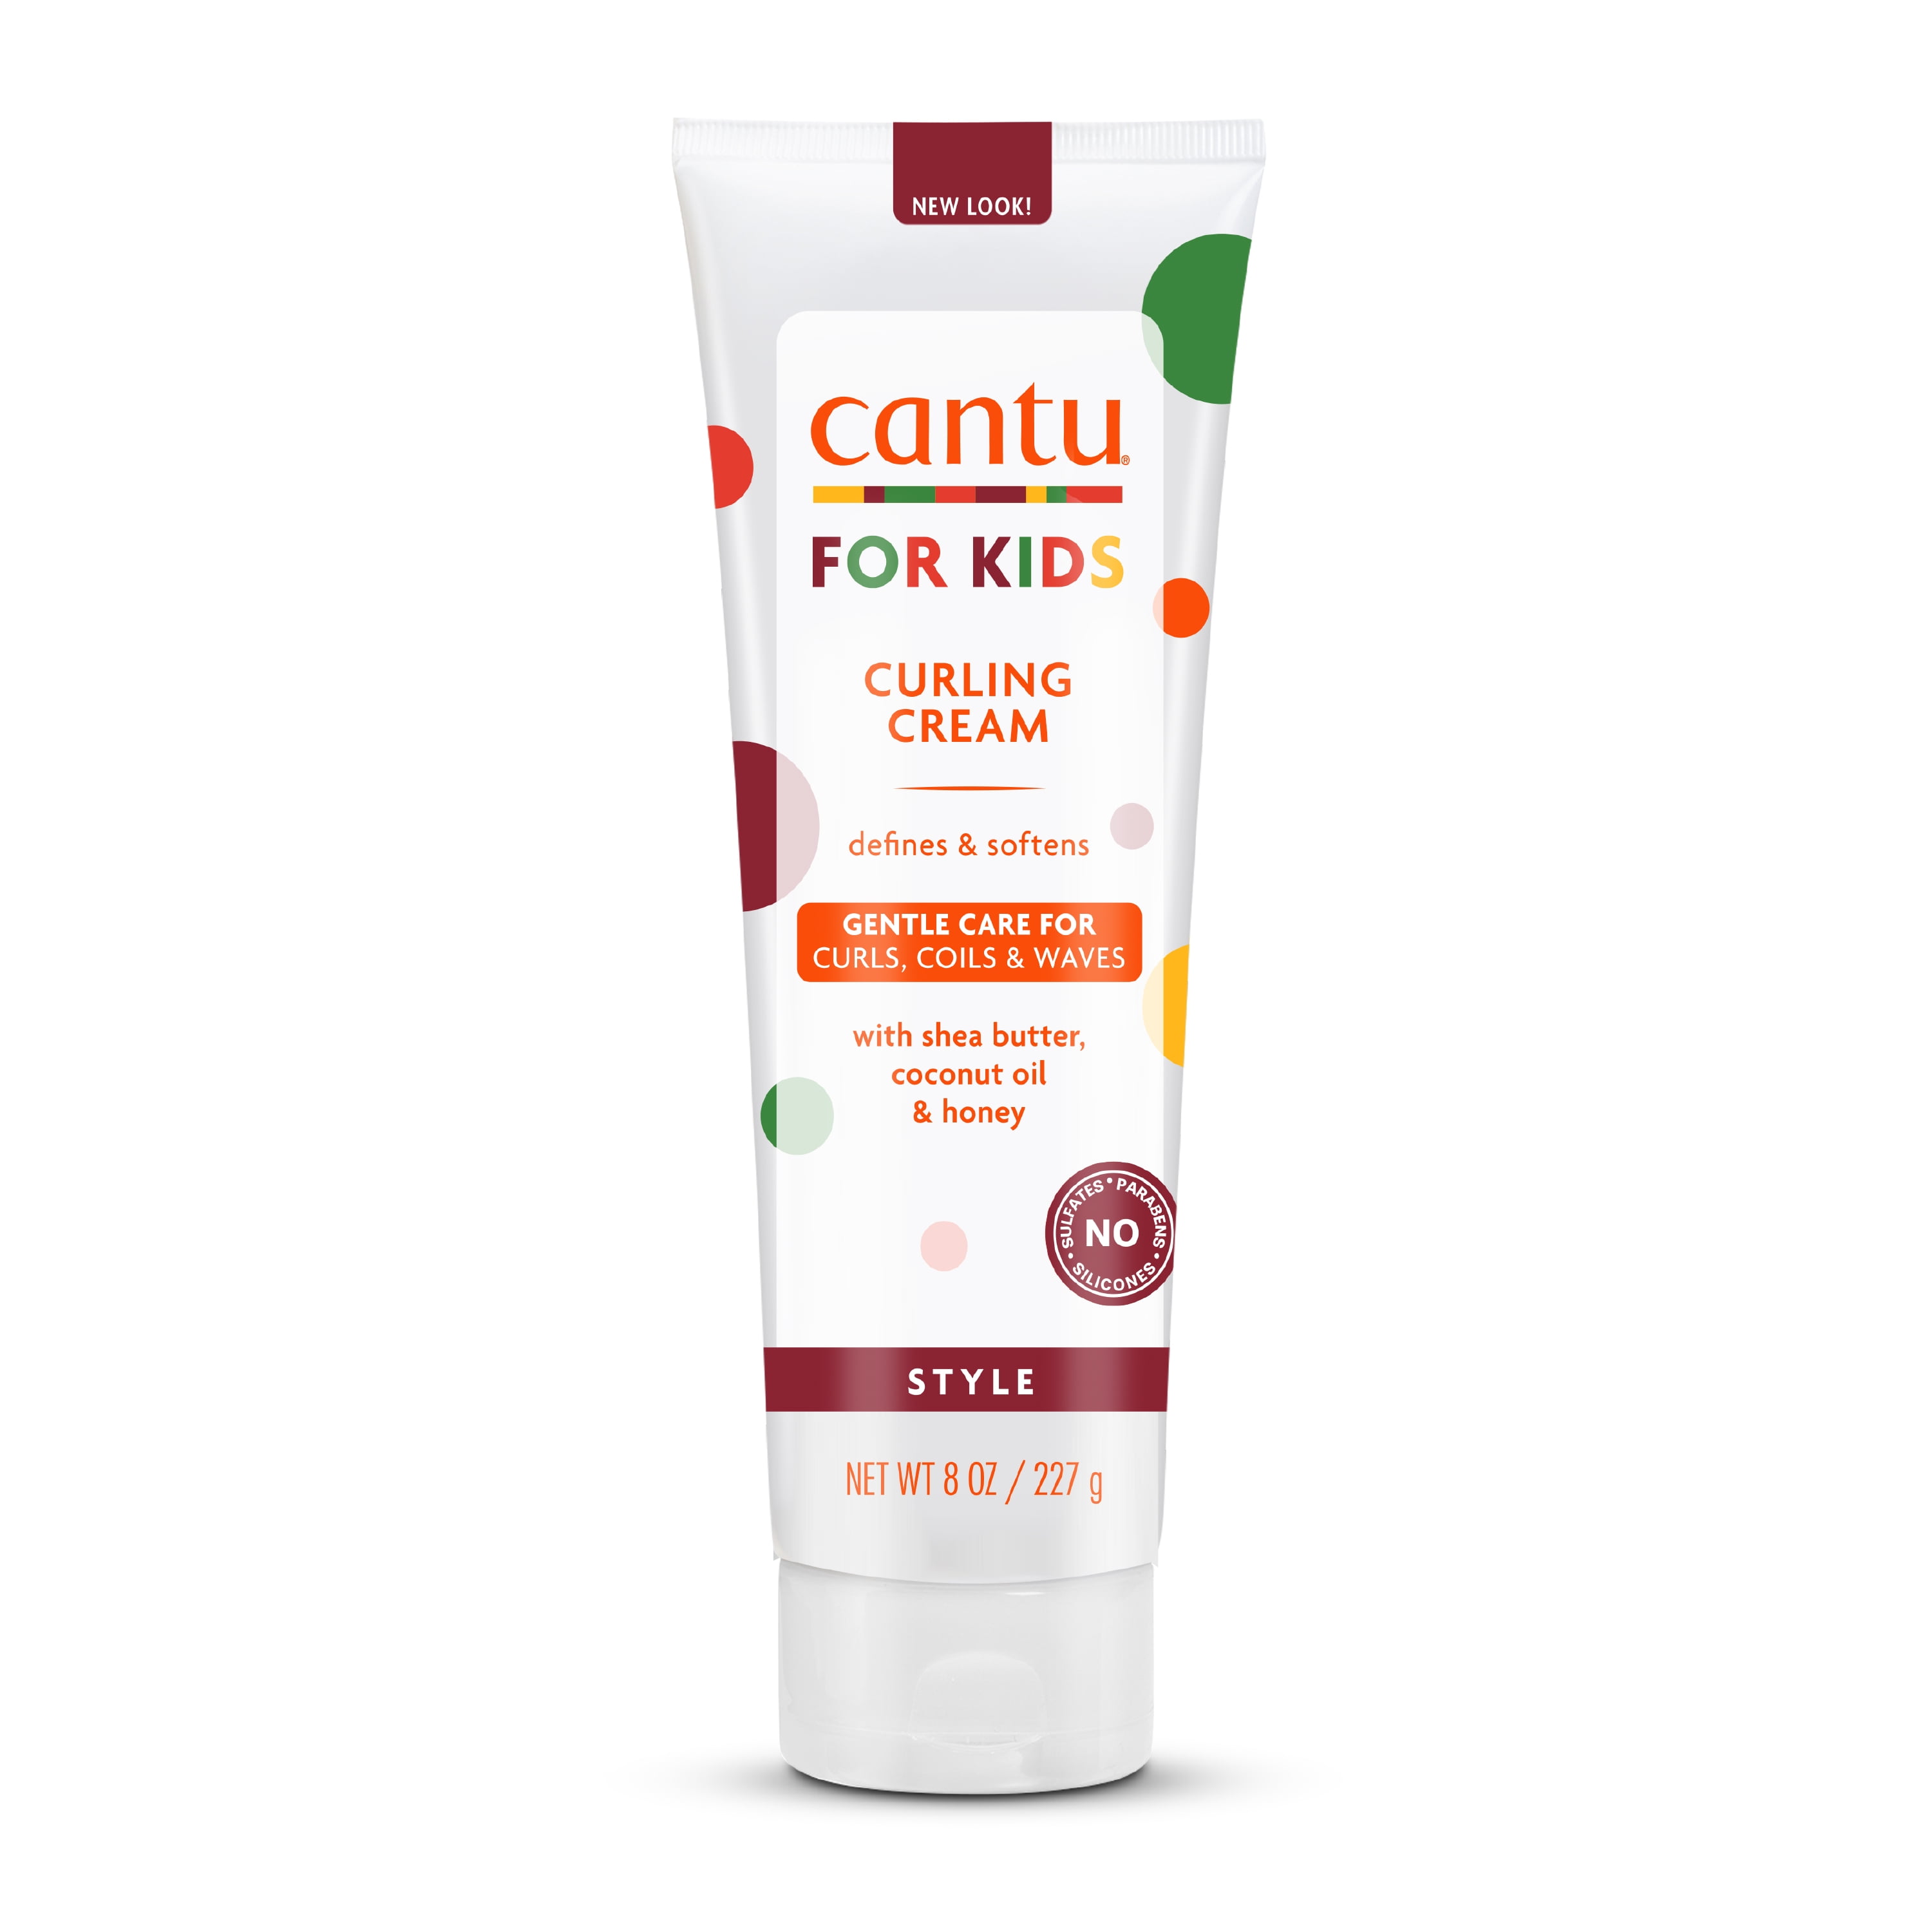 CANTU FOR KIDS REVIEW ON WAVY HAIR  Cantu Care For Kids Shampoo & Curl  Cream Review On Wavy Hair 